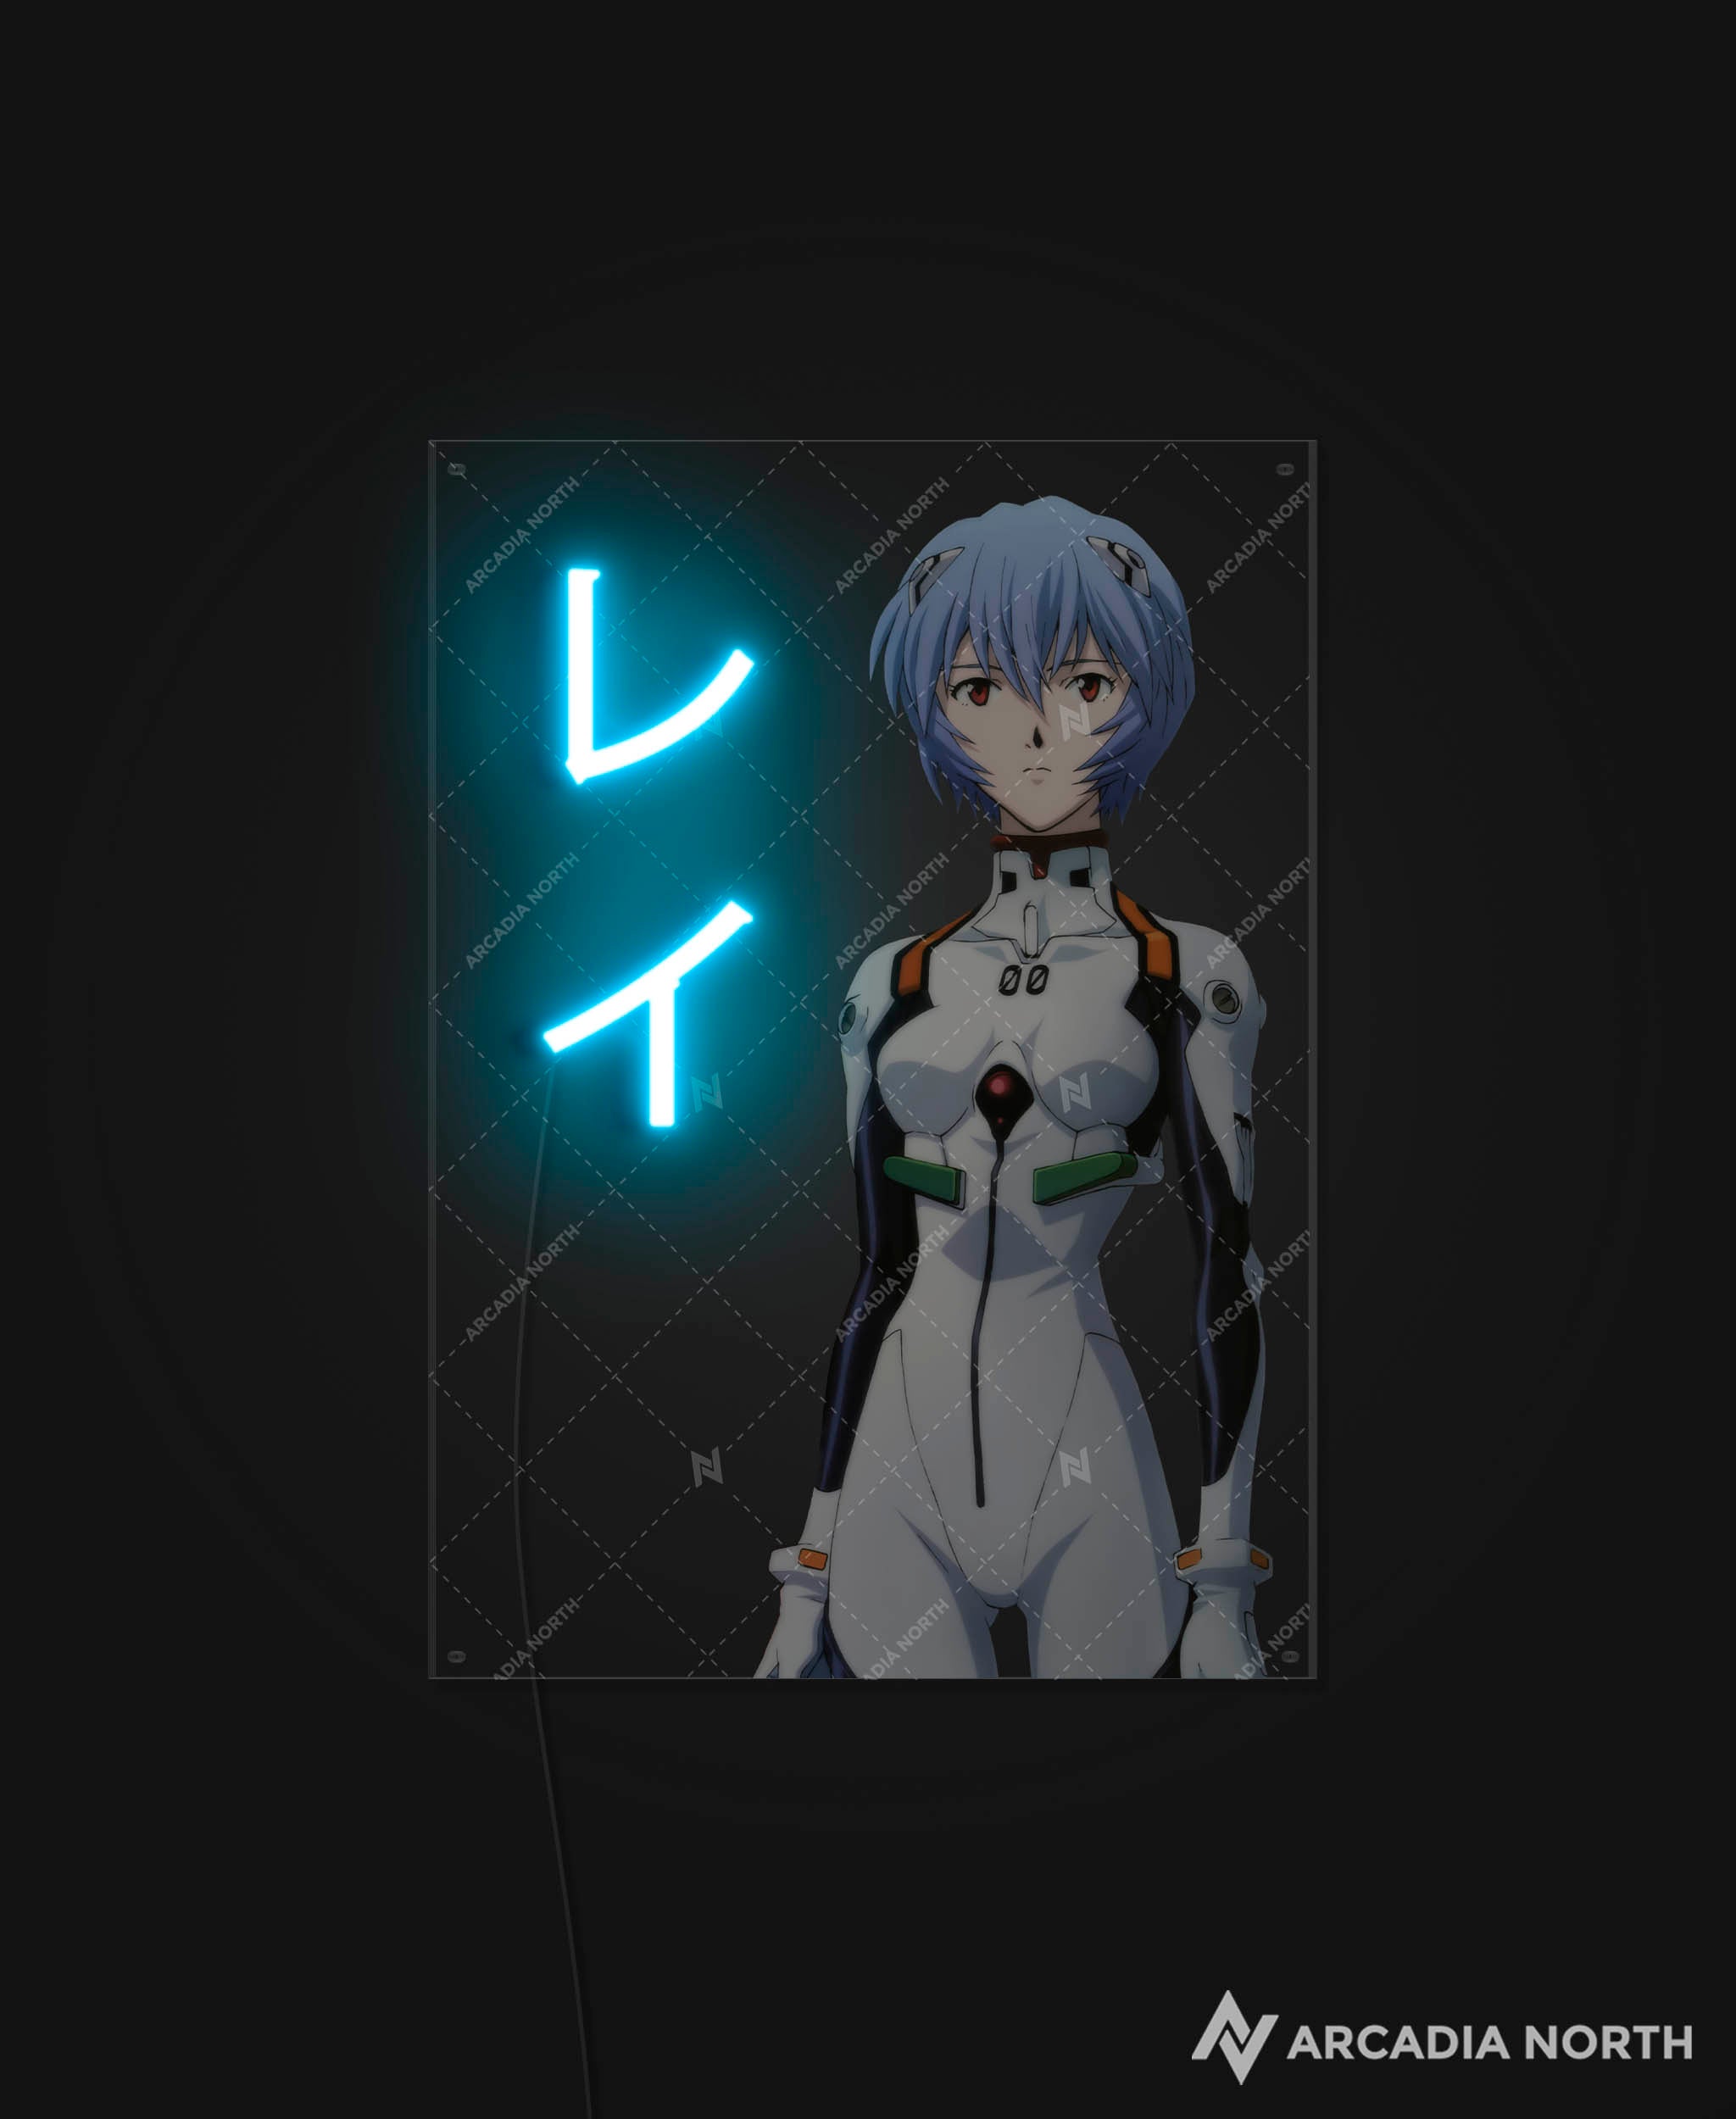 Arcadia North AURALIGHT - an LED Poster featuring the anime Neon Genesis Evangelion with Rei Ayanami and her name Rei in Japanese Katakana illuminated by glowing neon LED lights. UV-printed on acrylic.